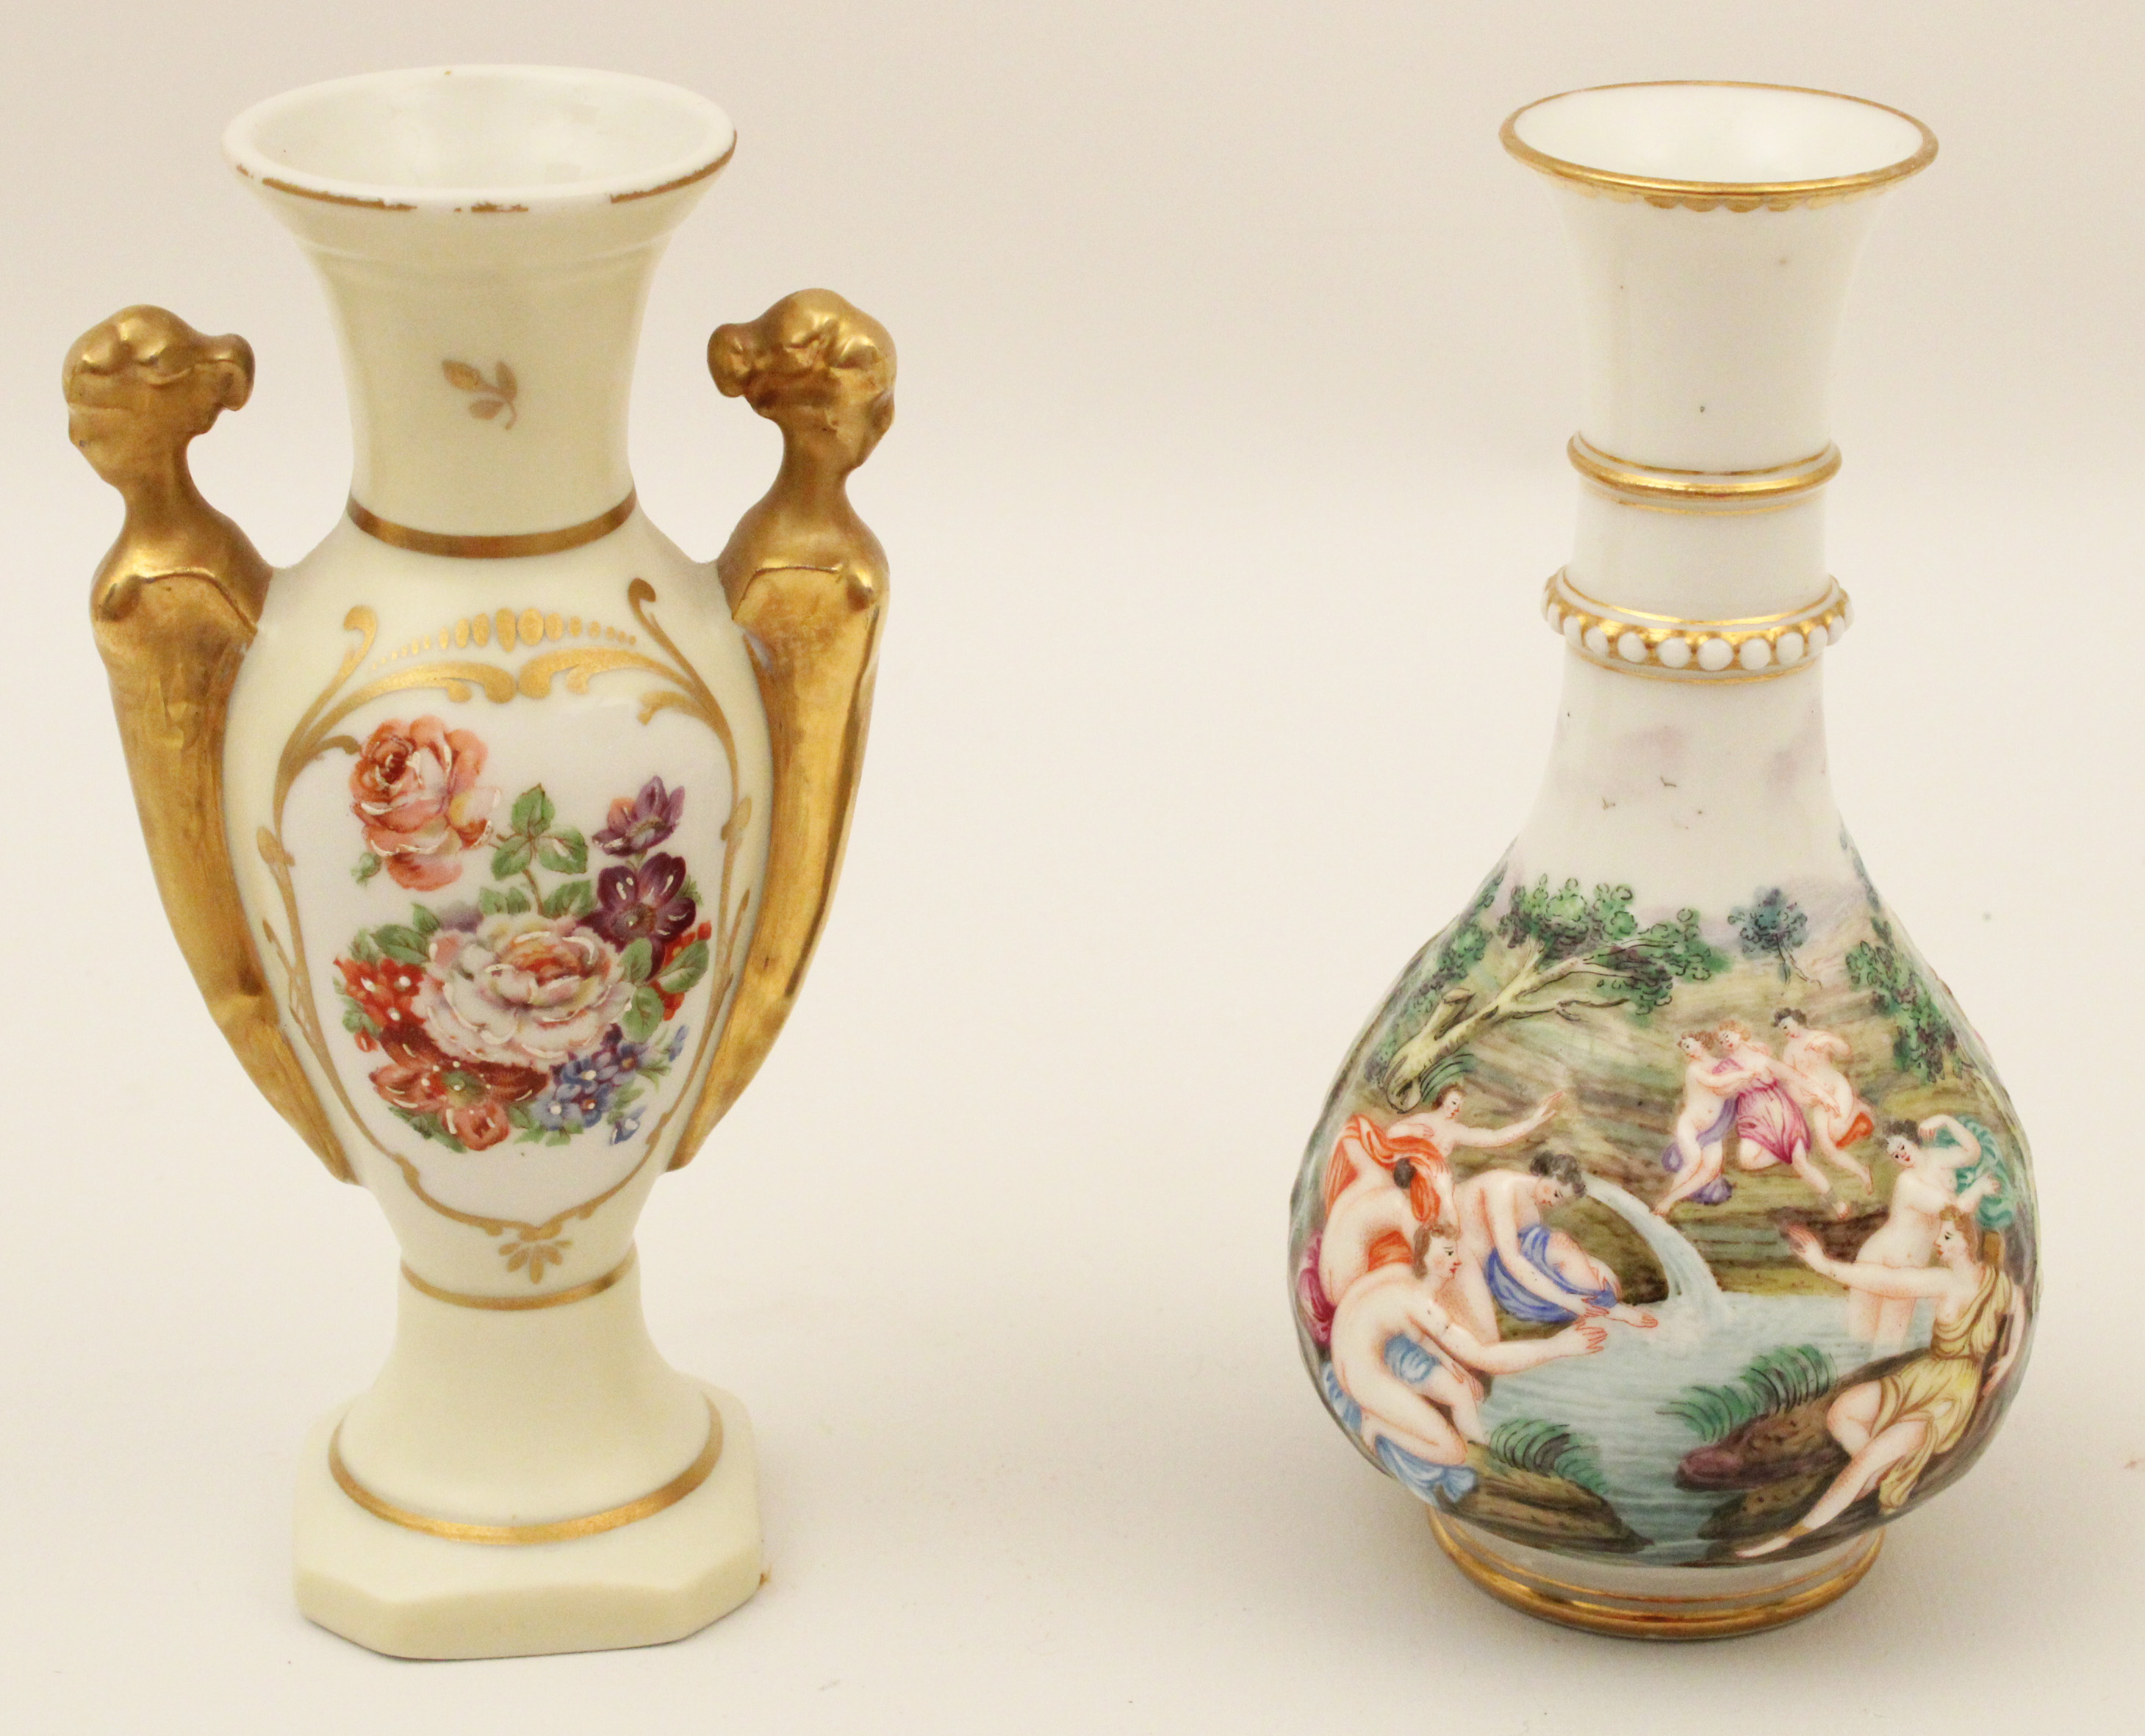 TWO MISCELLANEOUS CONTINENTAL PORCELAIN